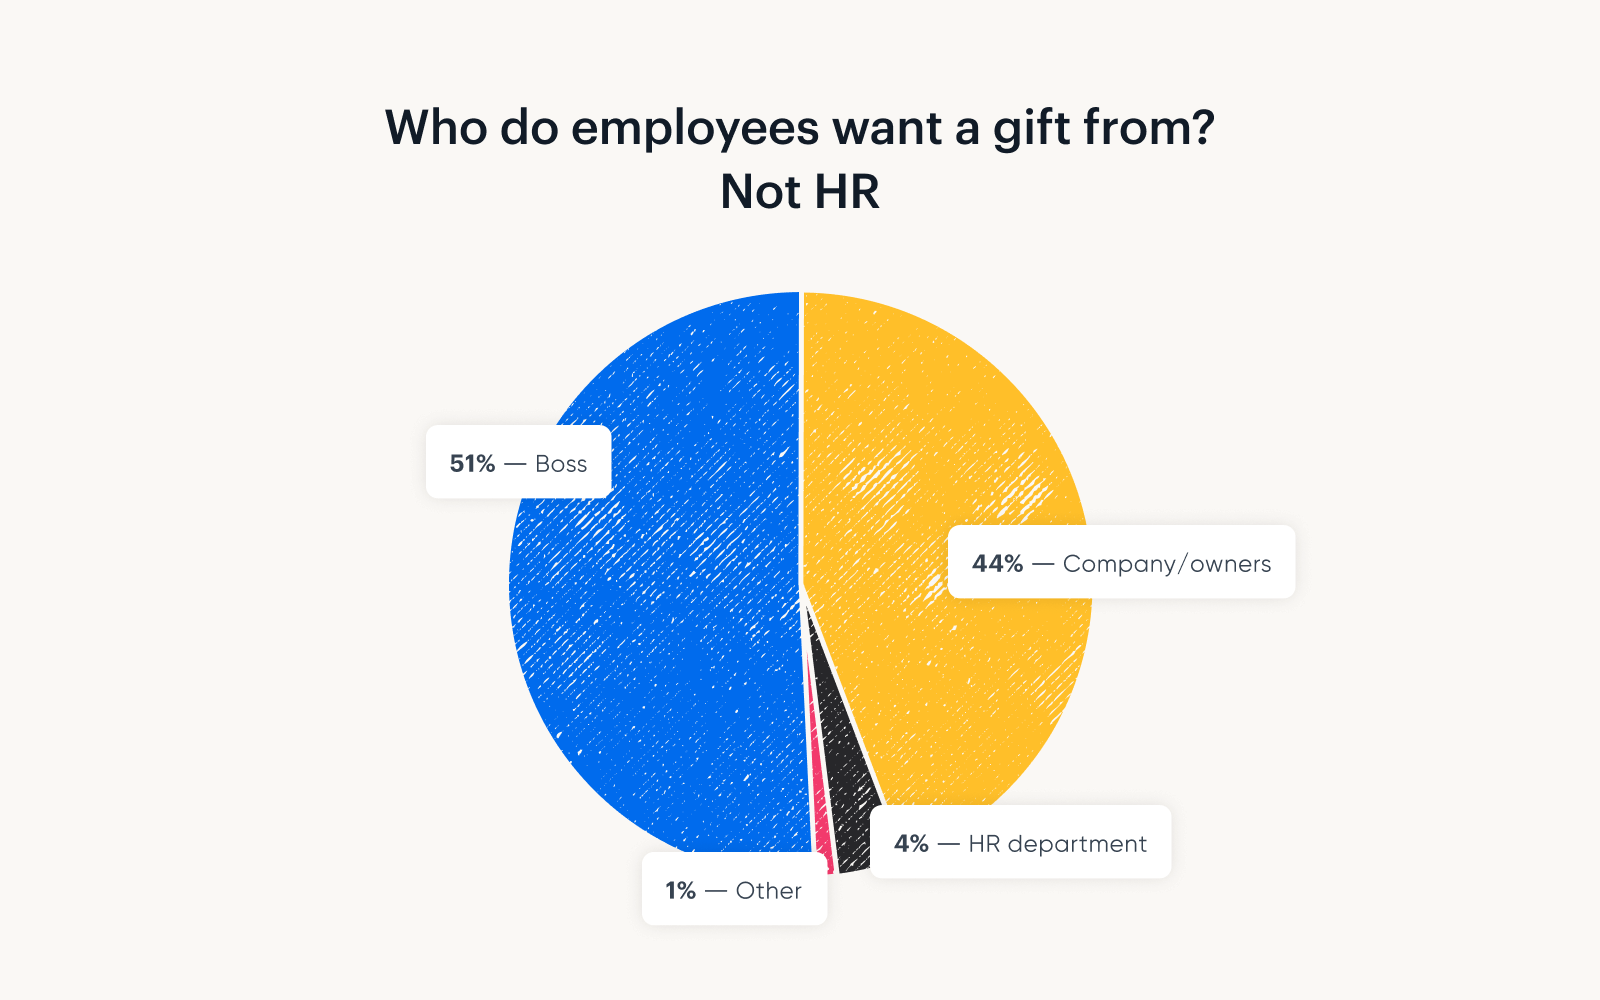 A graph showing that most employees want a gift from their boss or company owners, rather than the HR department.